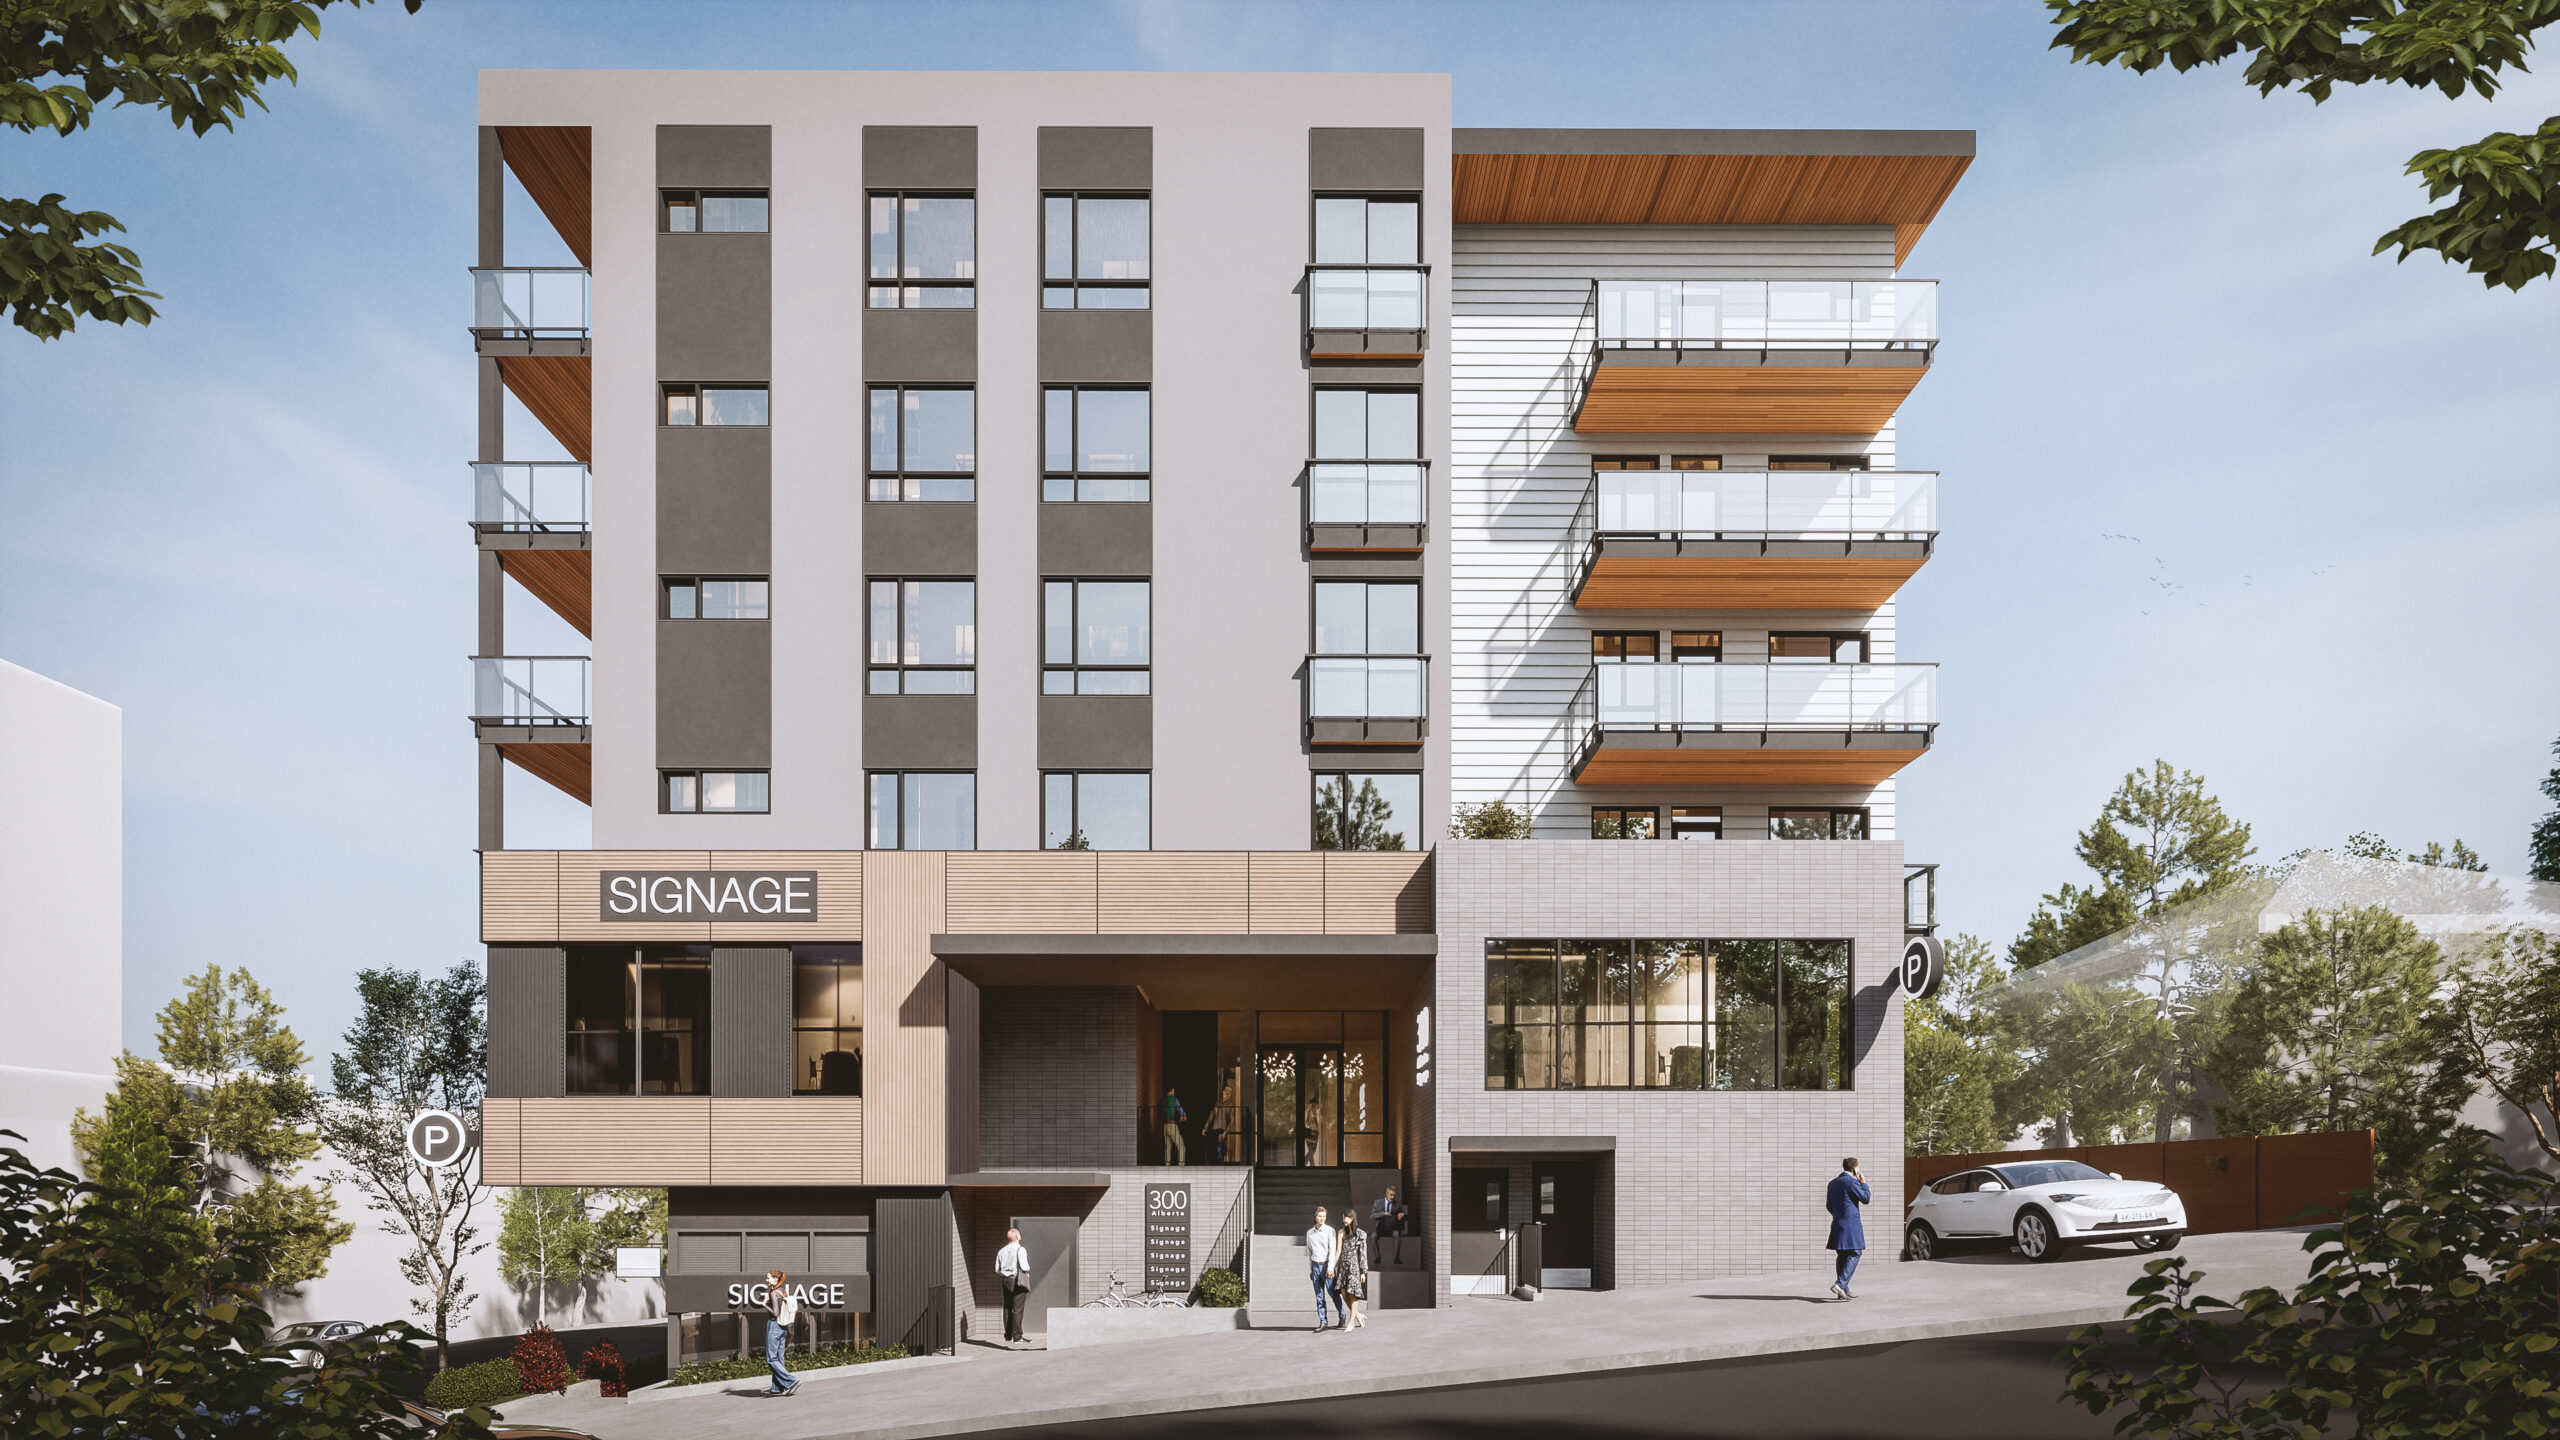 An upcoming mixed-use rental building on East Columbia Street in Sapperton, New West.